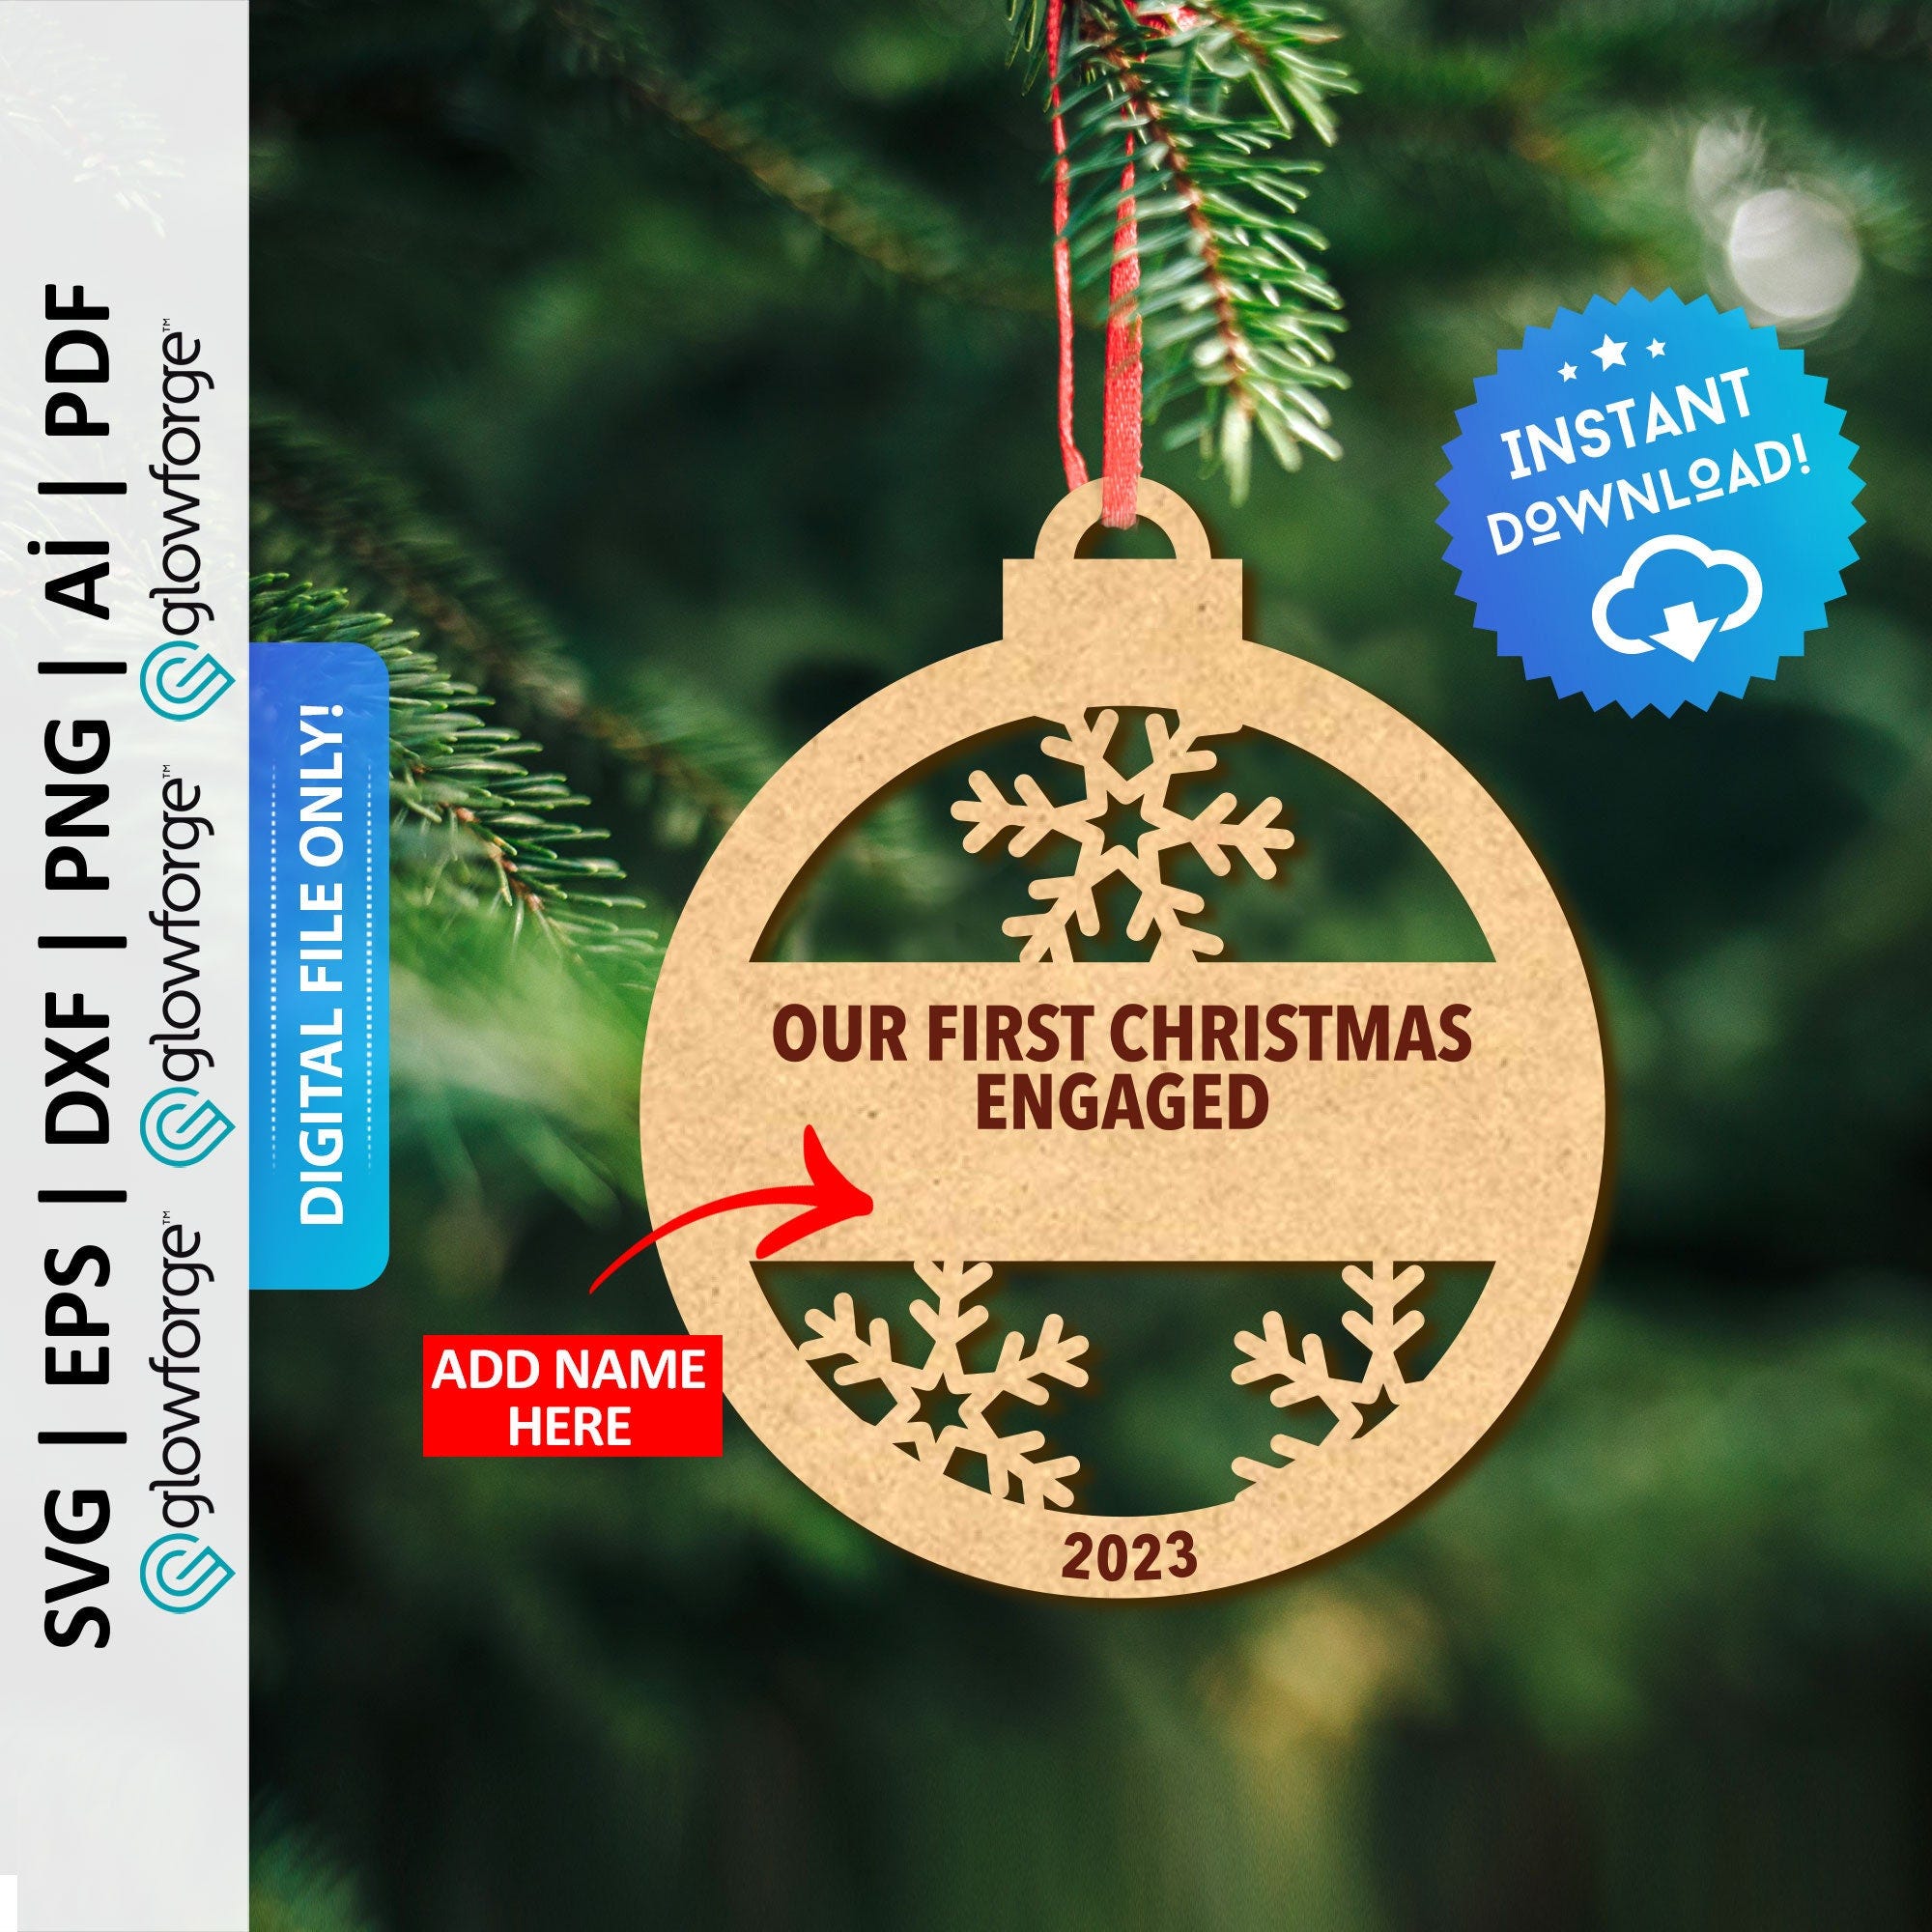 Our First Christmas Engaged Ornament Svg, Just Engaged Ornament, Xmas Tree Engagement, Glowforge Laser Cut File, Instant Download - PD0399